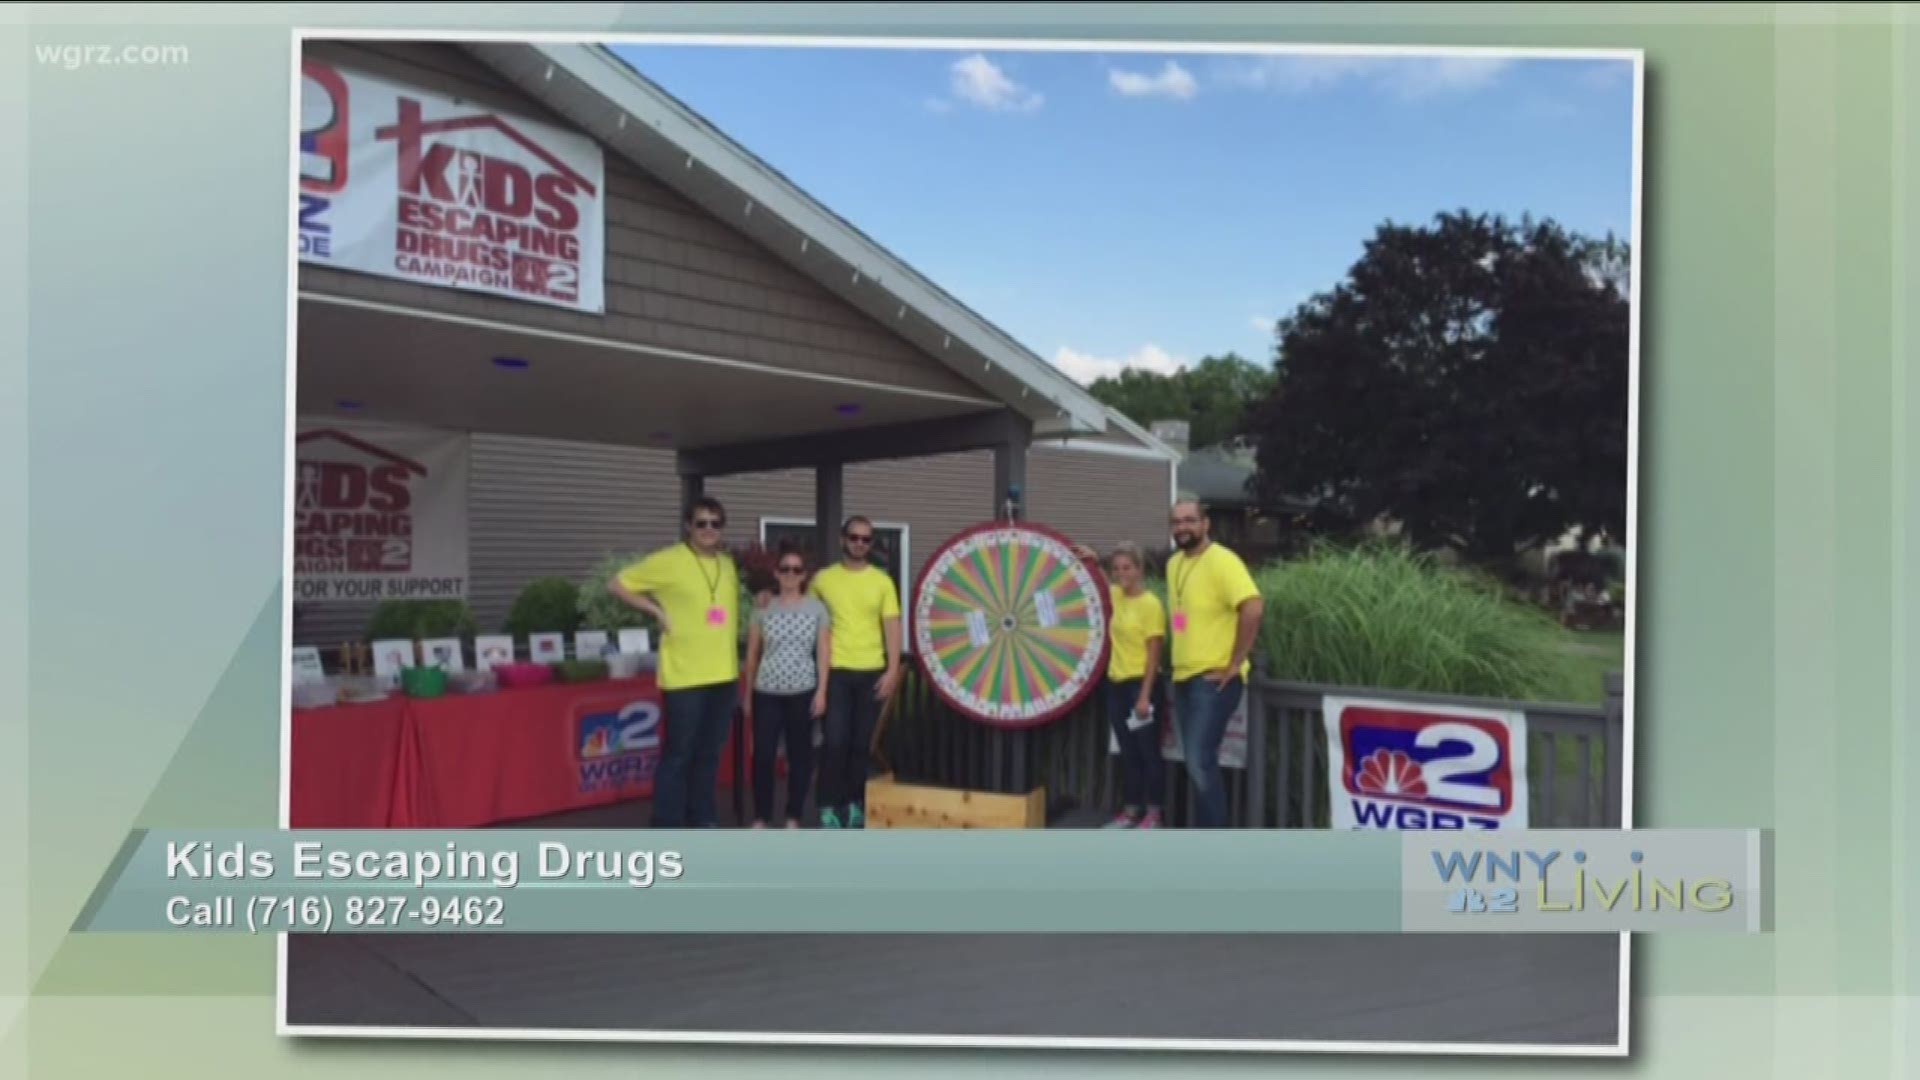 WNY Living - August 4th - Kids Escaping Drugs